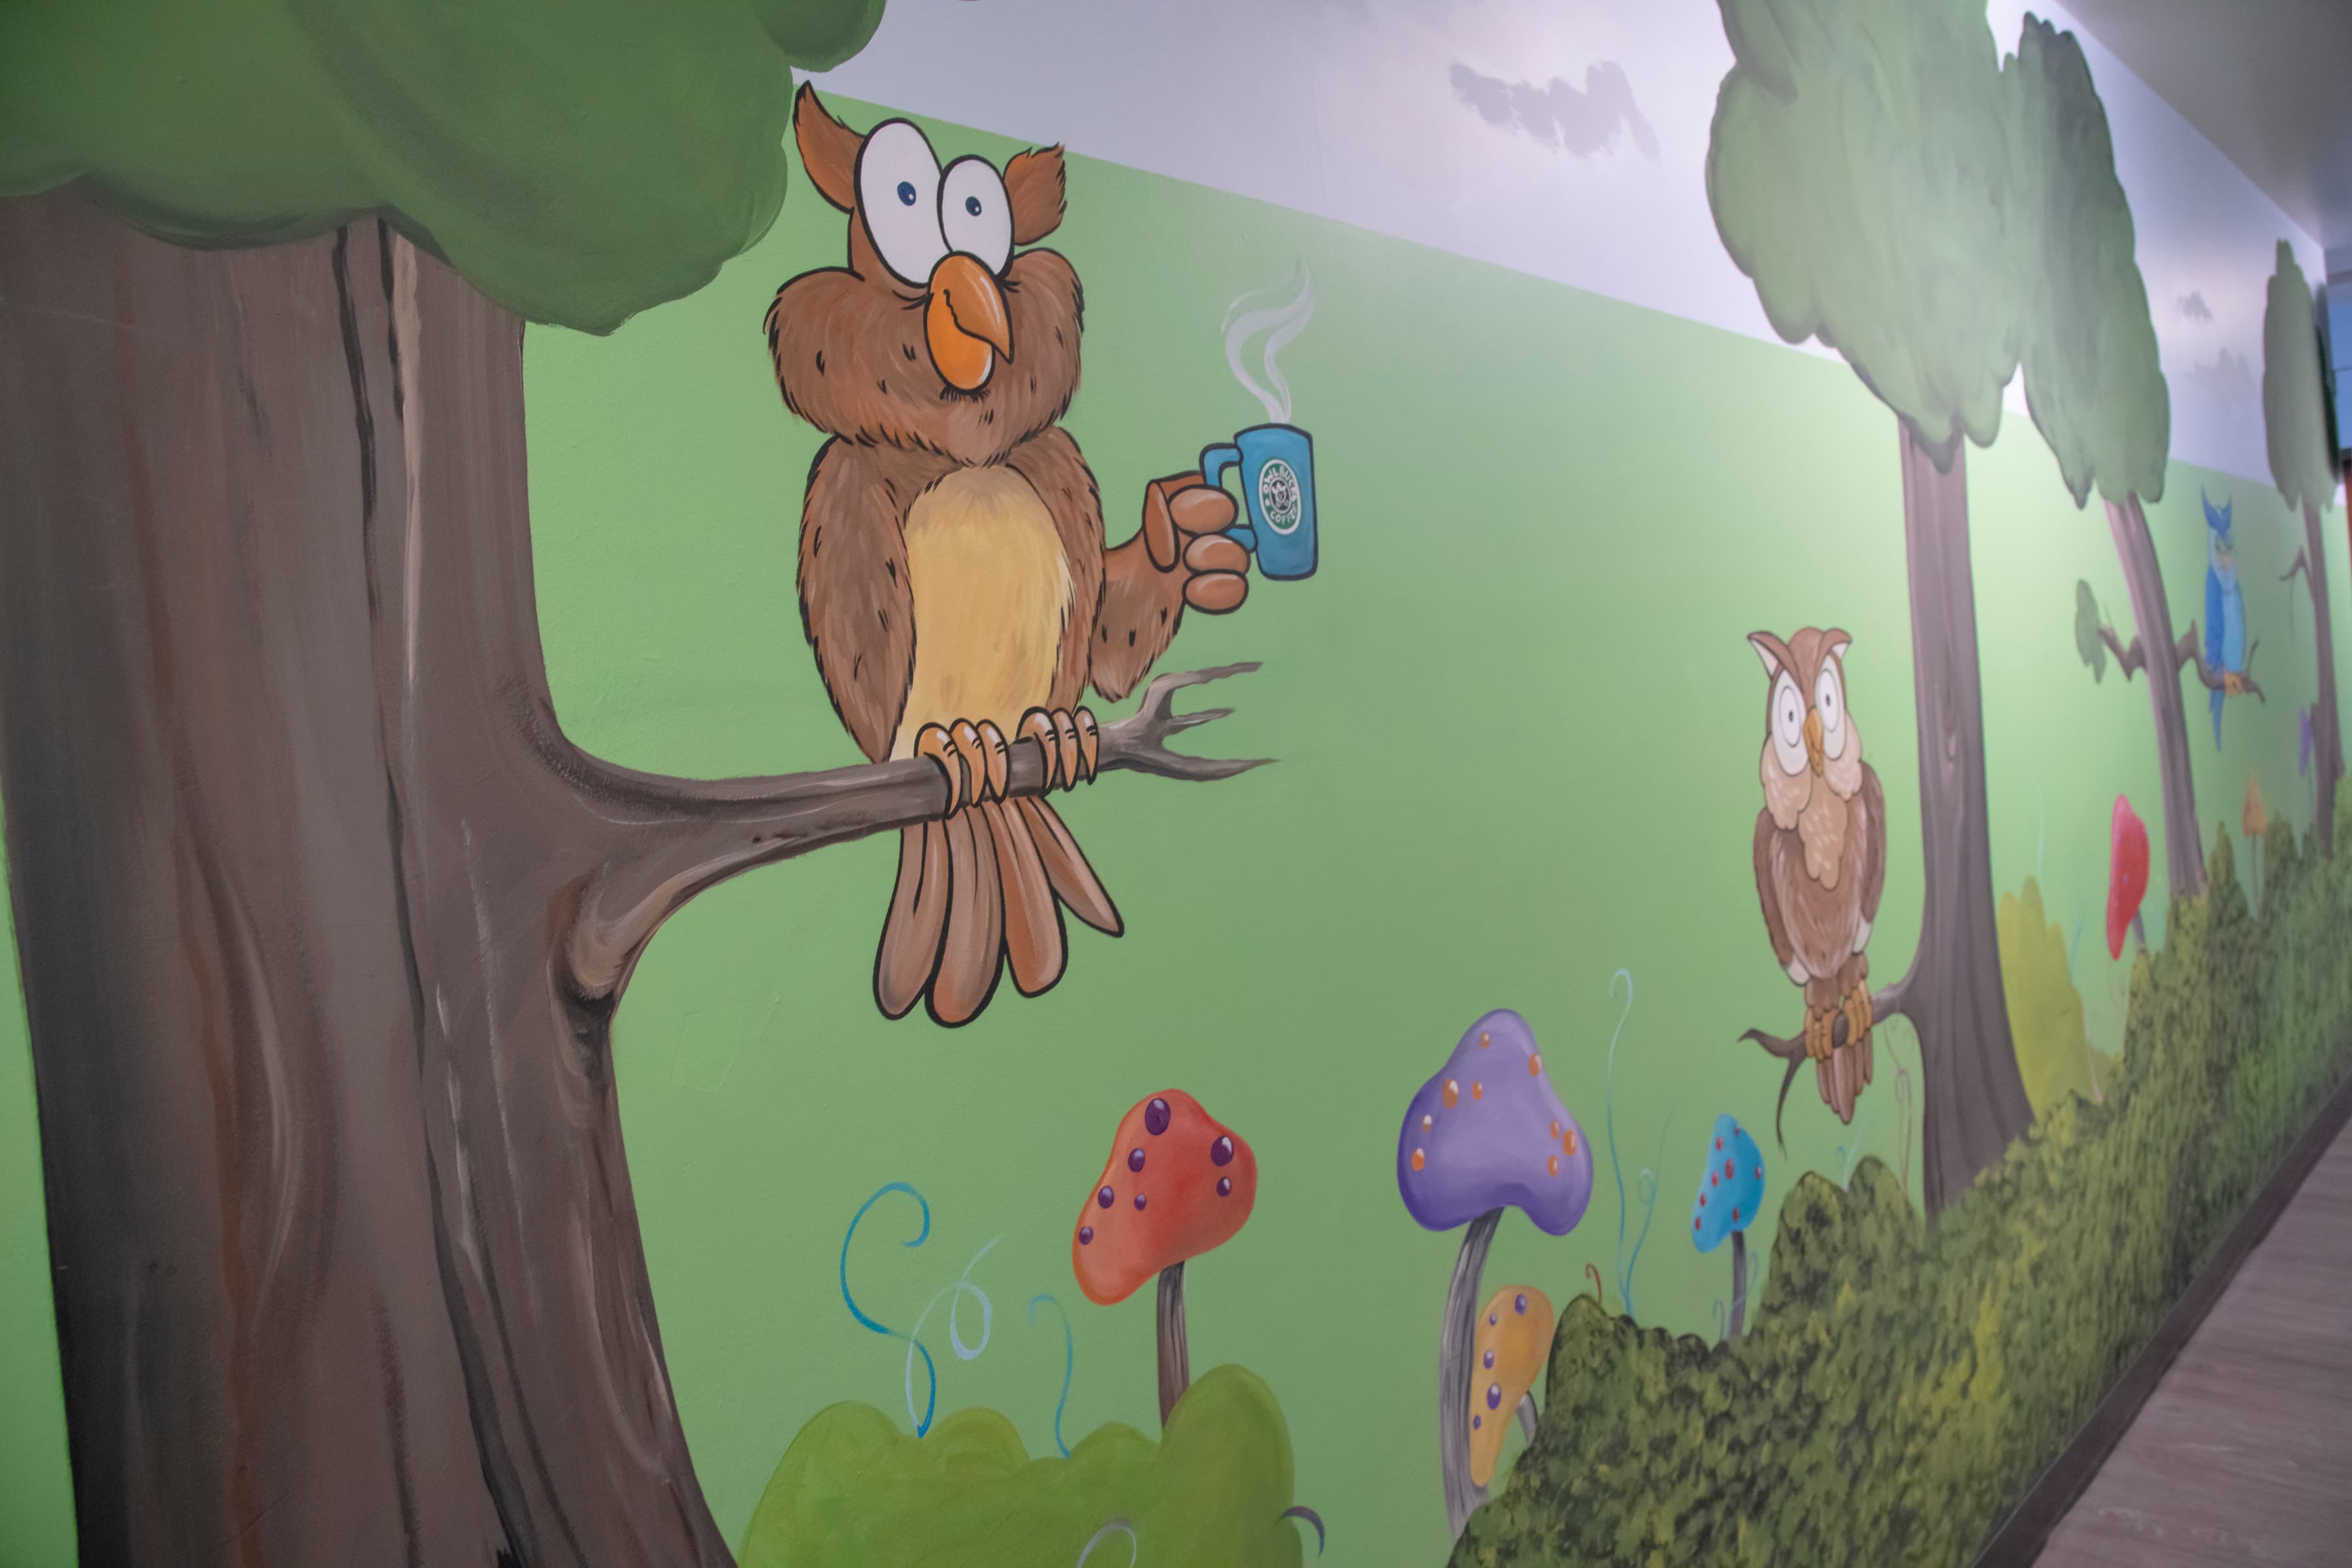 graphic of an owl sitting on a tree limb holding a cup